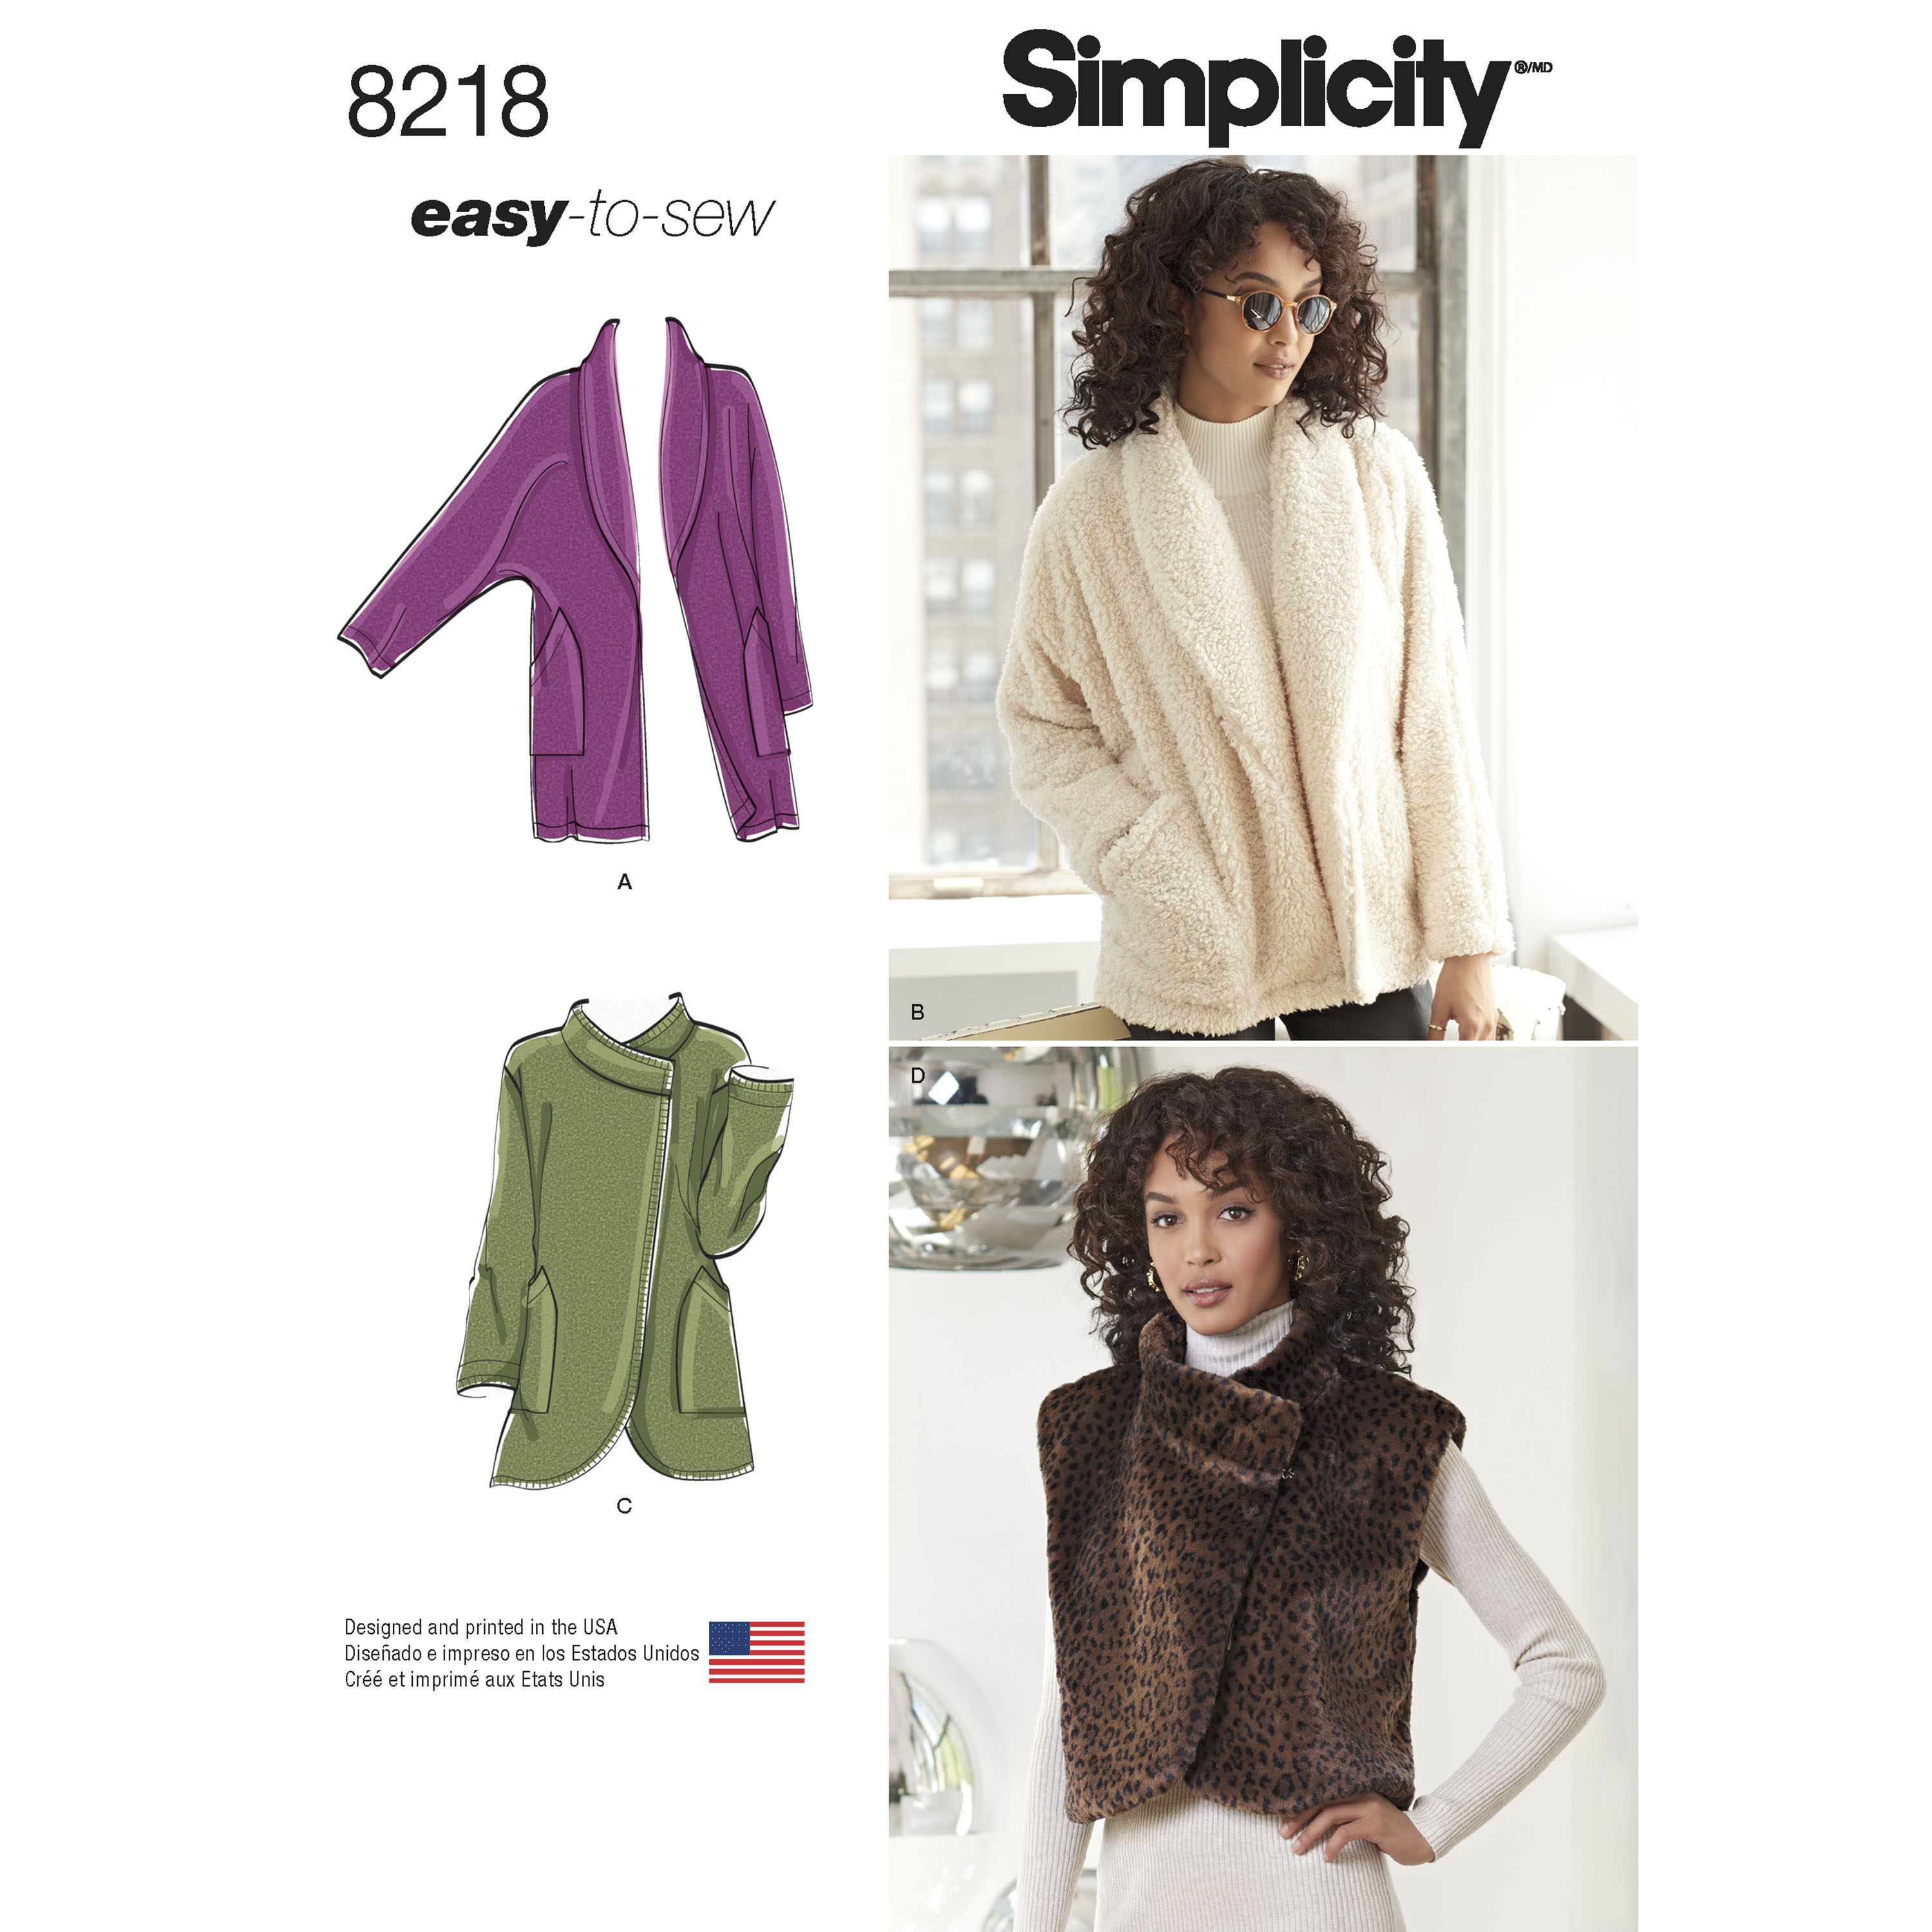 Simplicity 8218 Misses' Easy-to-Sew Jackets and Vest